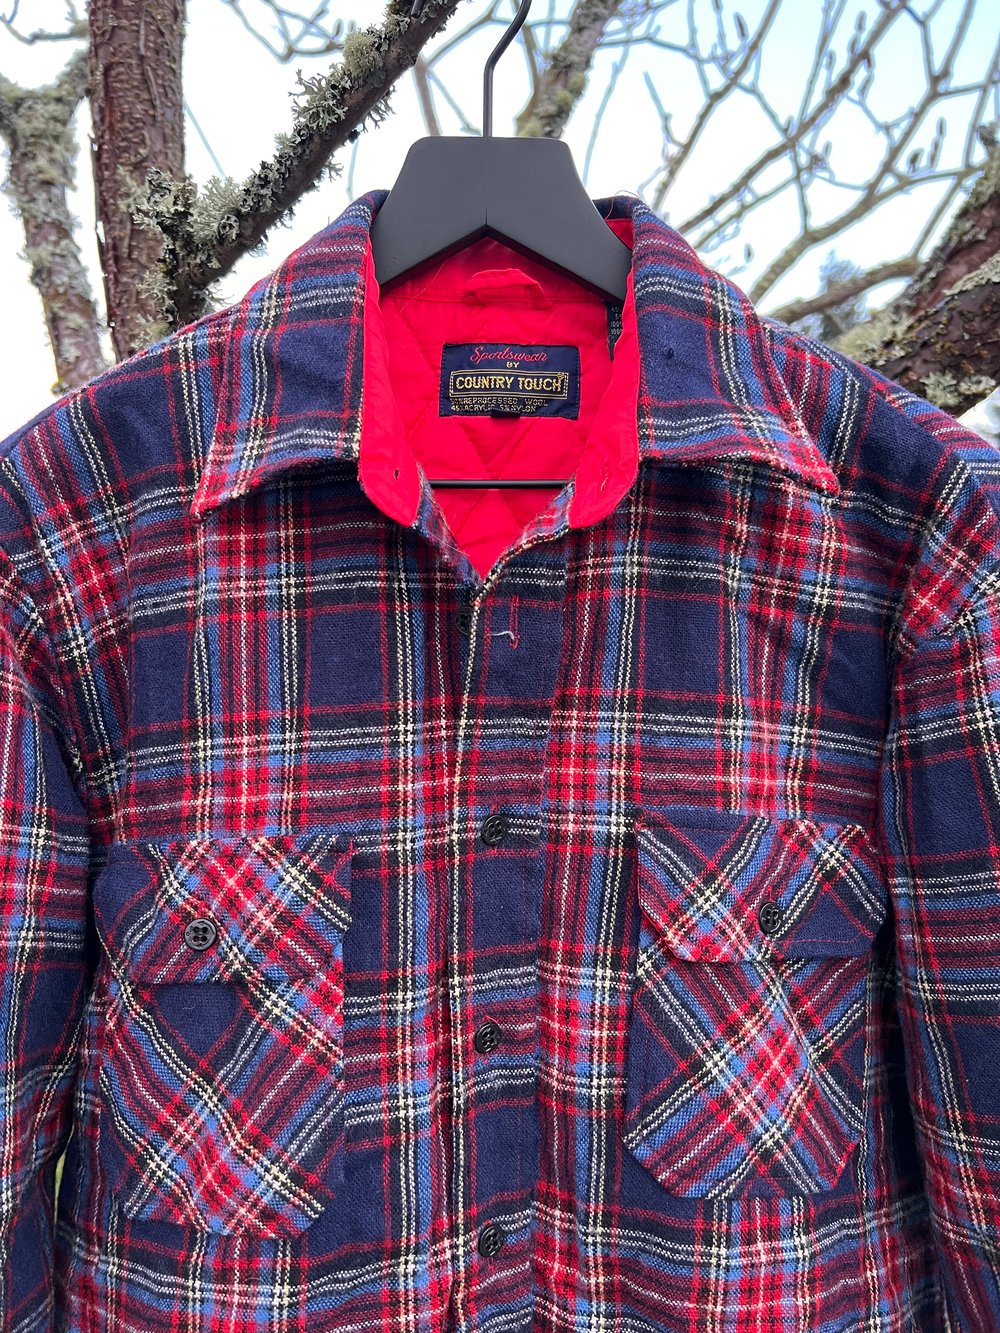 Vintage Country Touch Plaid Shacket (M)